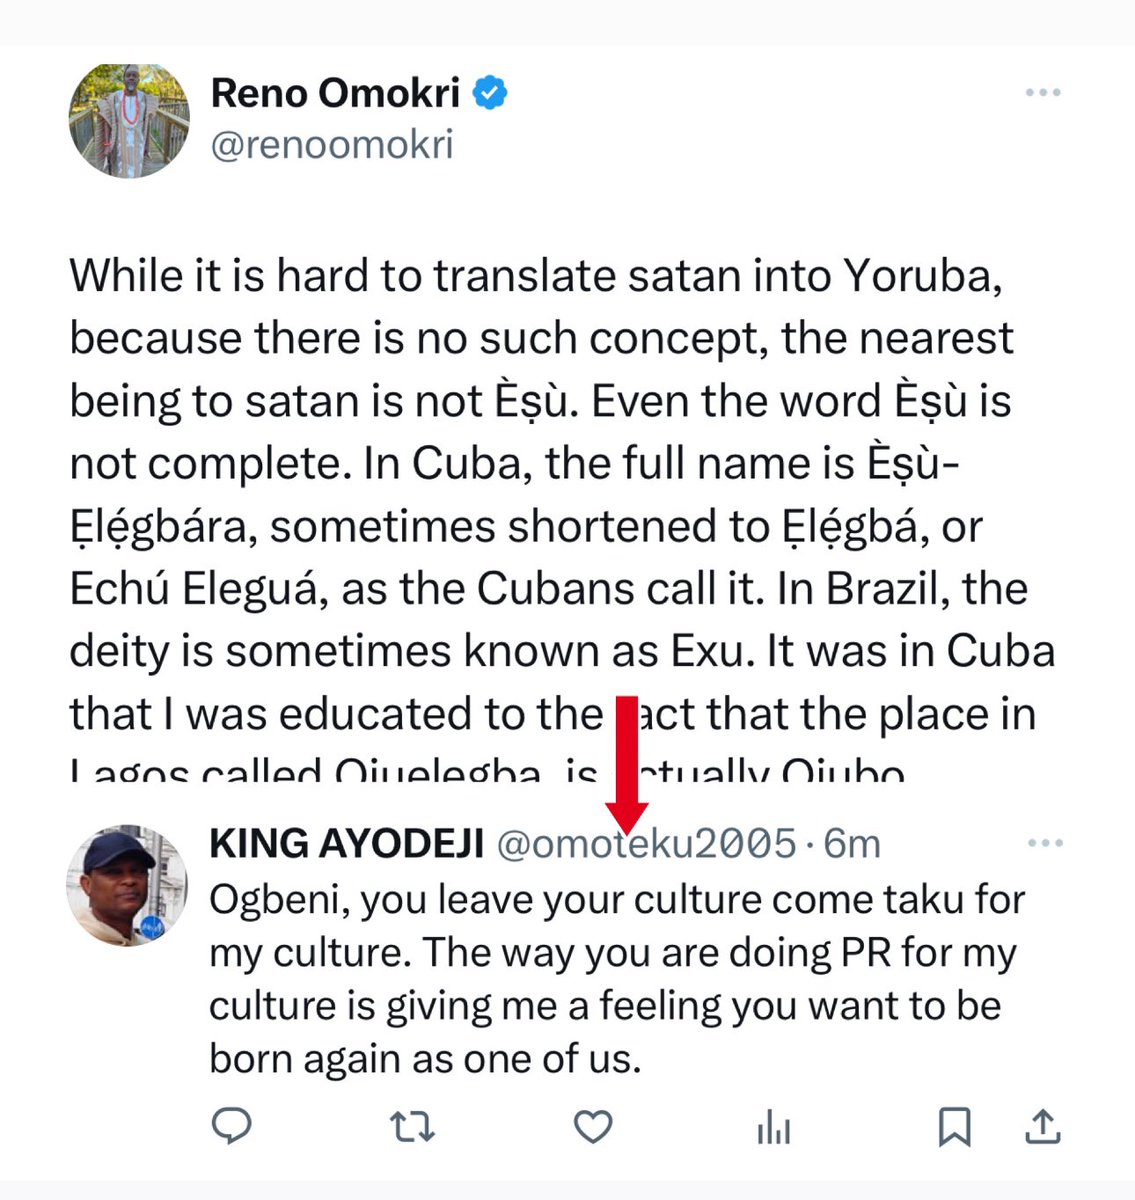 Dear Ayodeji, Thank you for your feedback. Your culture? You are not very conscious. You are so wrapped up in modernity that you do not even know your history. My language, Itsekiri, is one of the purest Olukumi cultures. You don't even know that you are not a Yoruba man. The